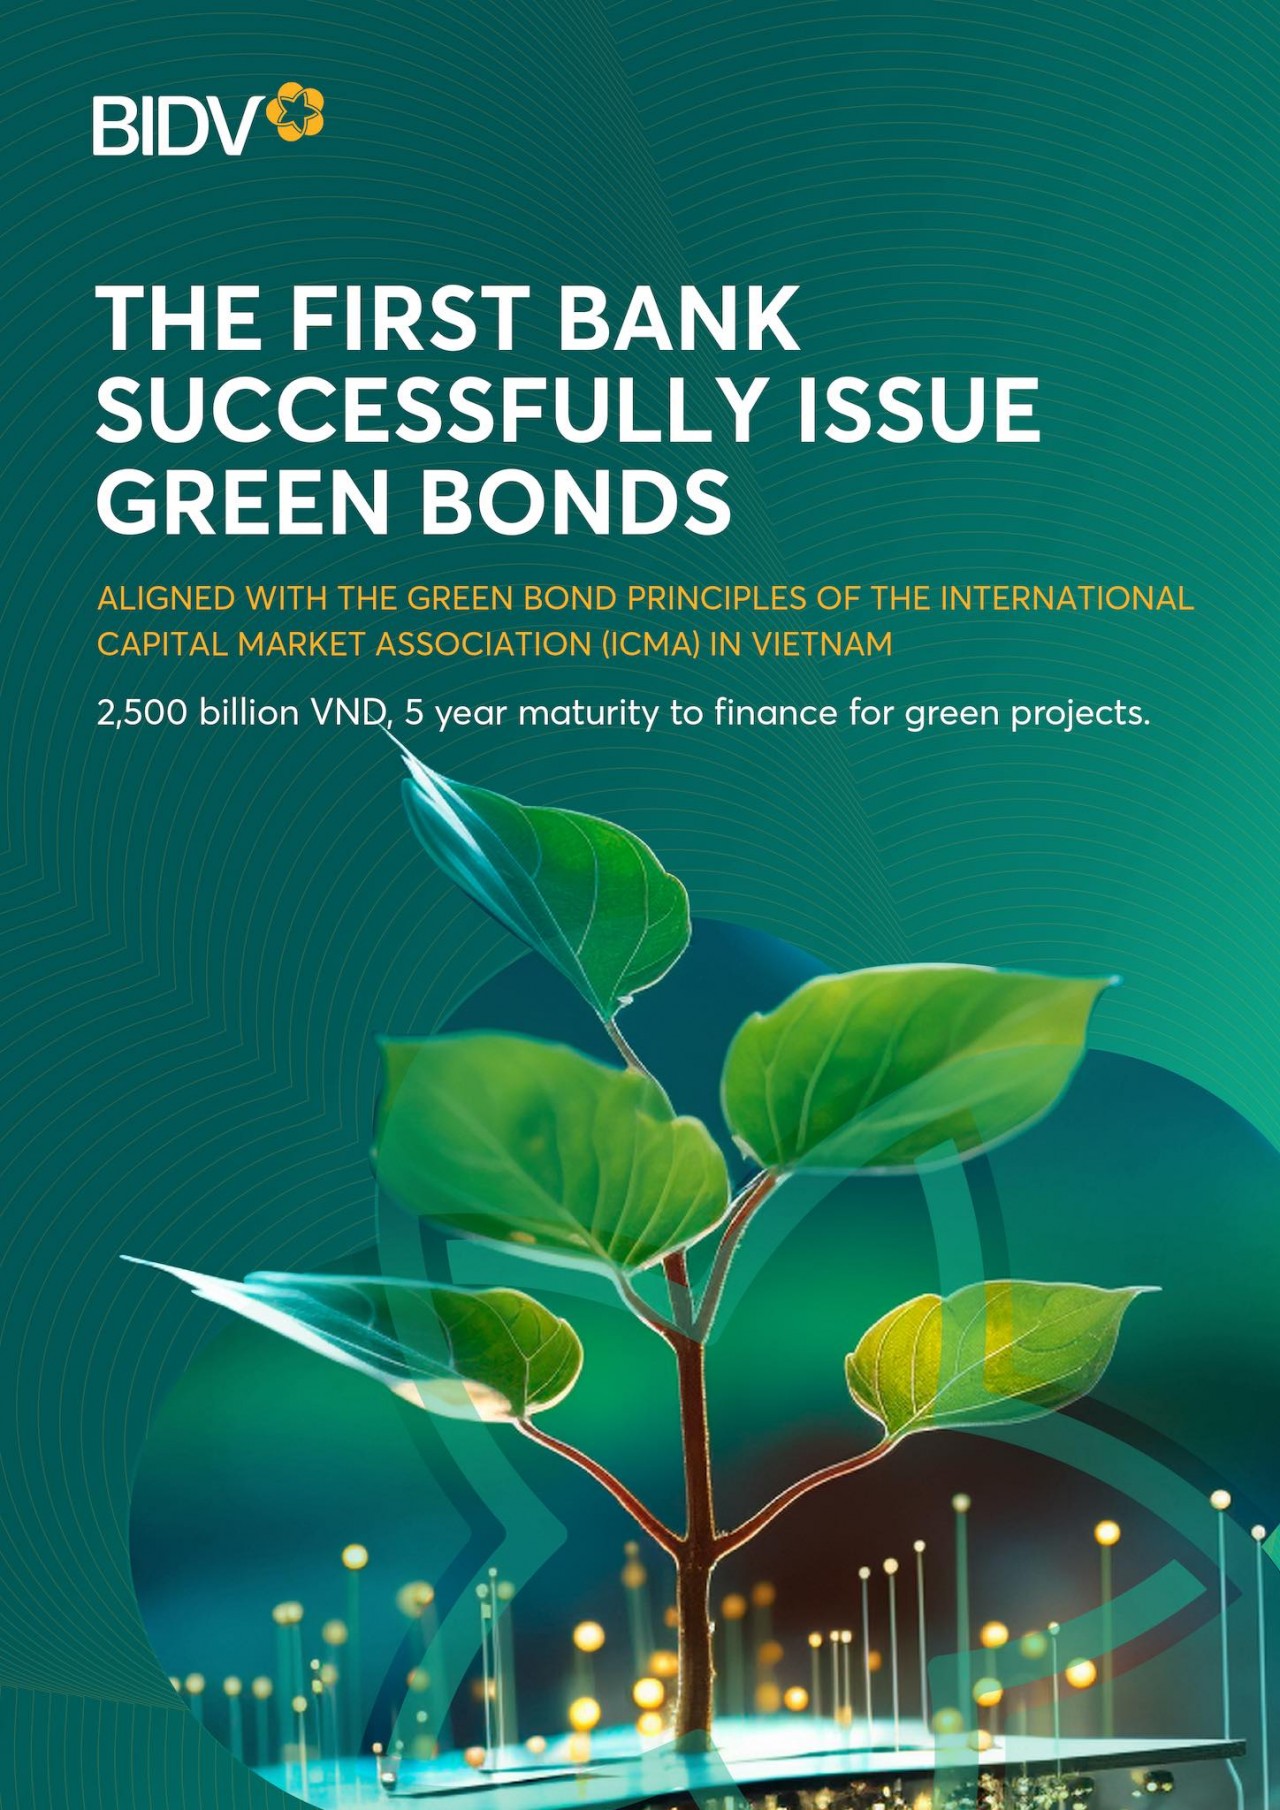 BIDV successfully issues VND 2,500 billion bonds to finance environmental projects